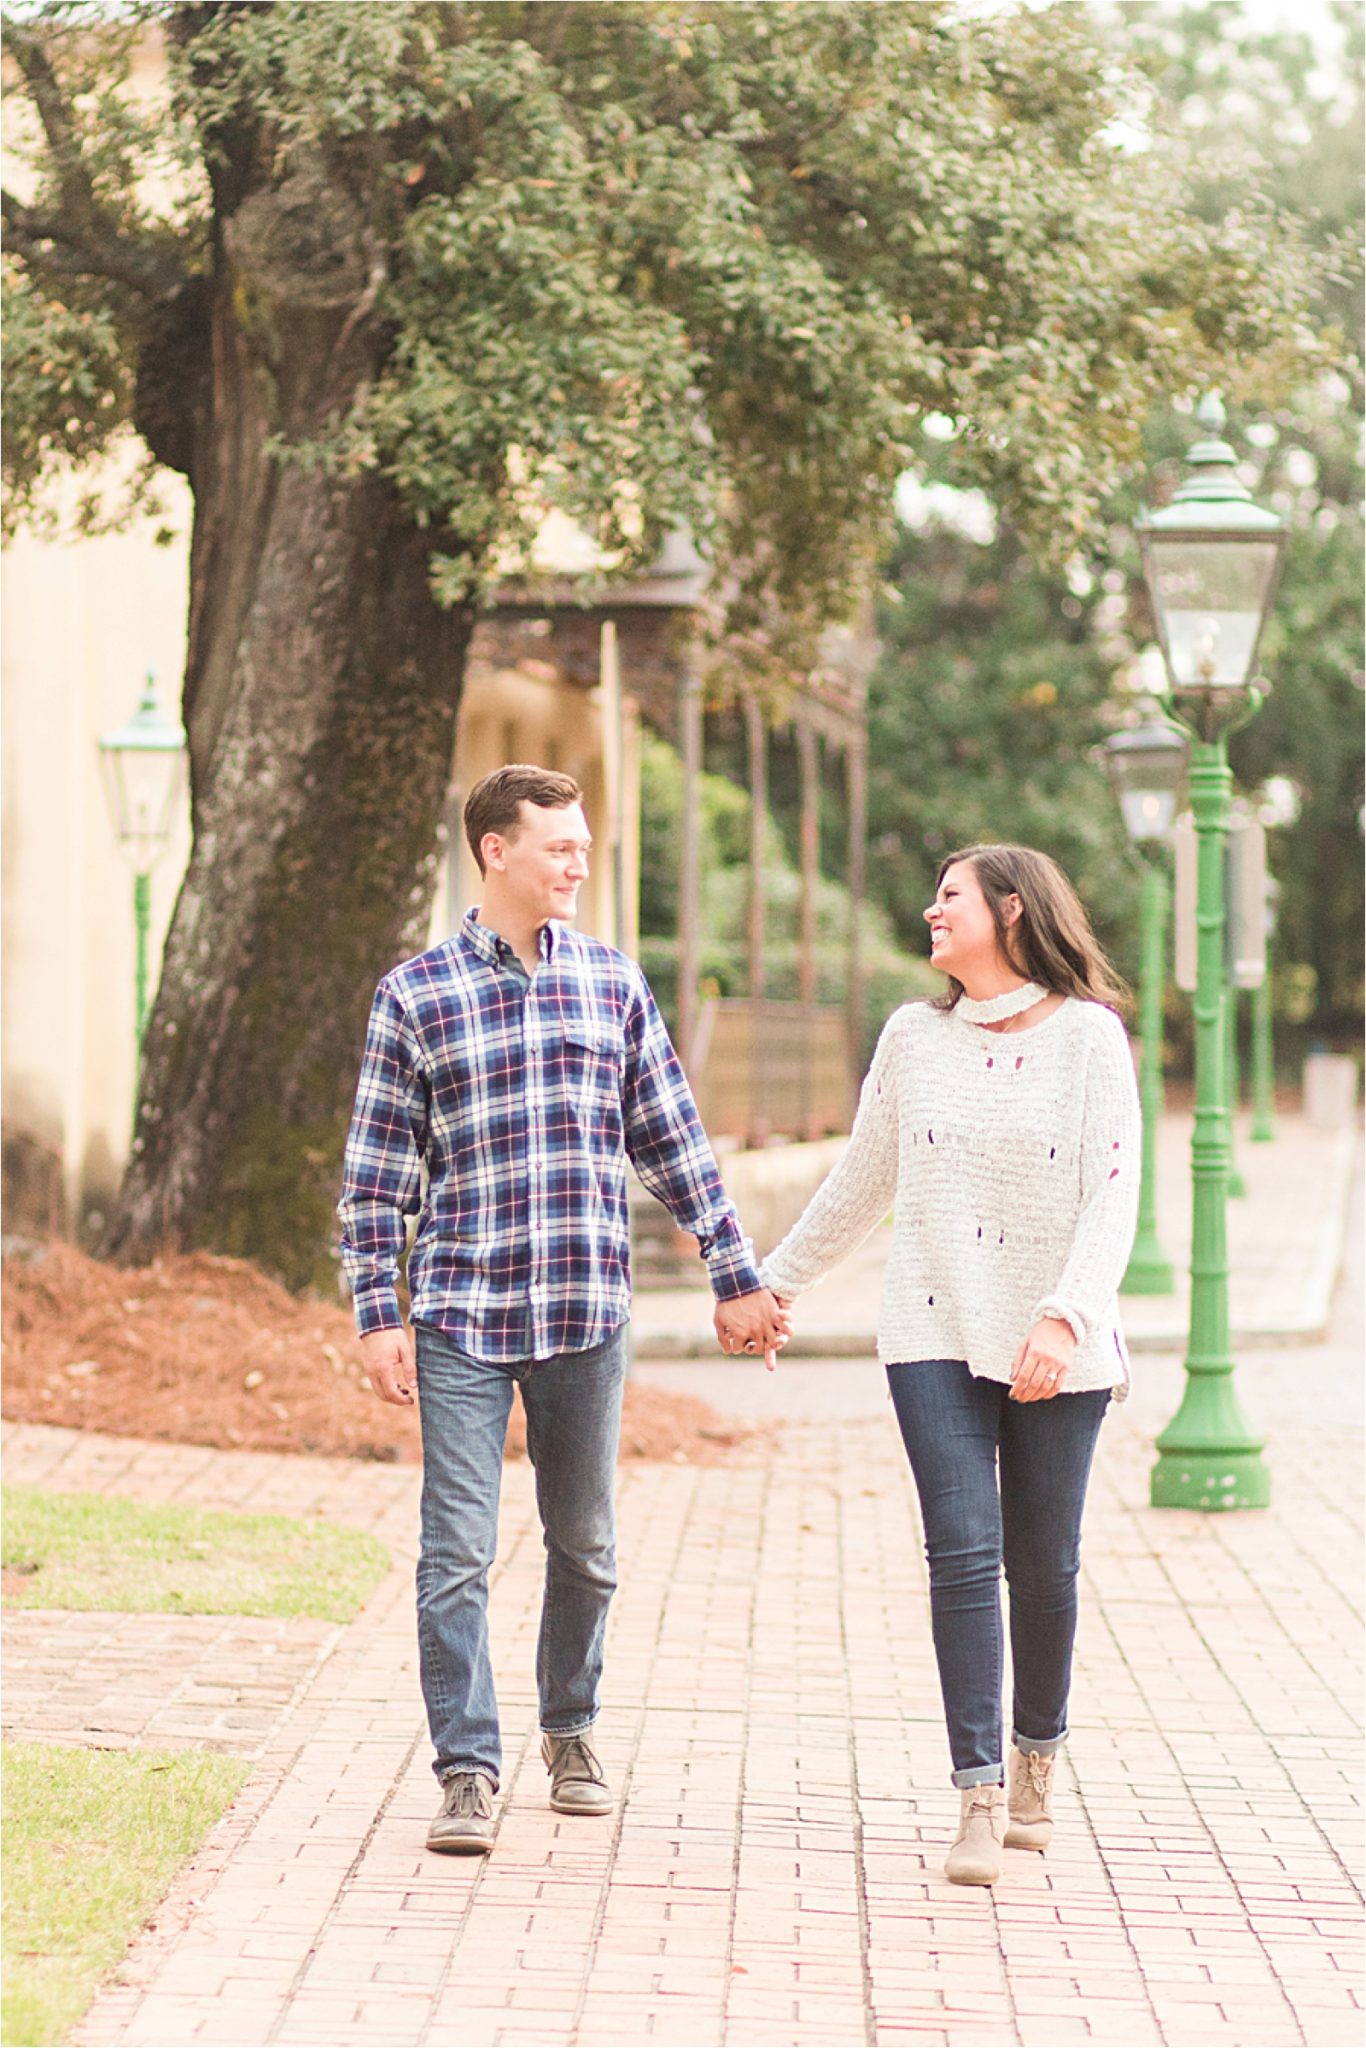 Mobile Alabama Photographer-Engagement Session-Josi + J.R.-Fall Engagement Session-Couple shoot-Candid-Forte Conde-Forte Conde Photoshoot